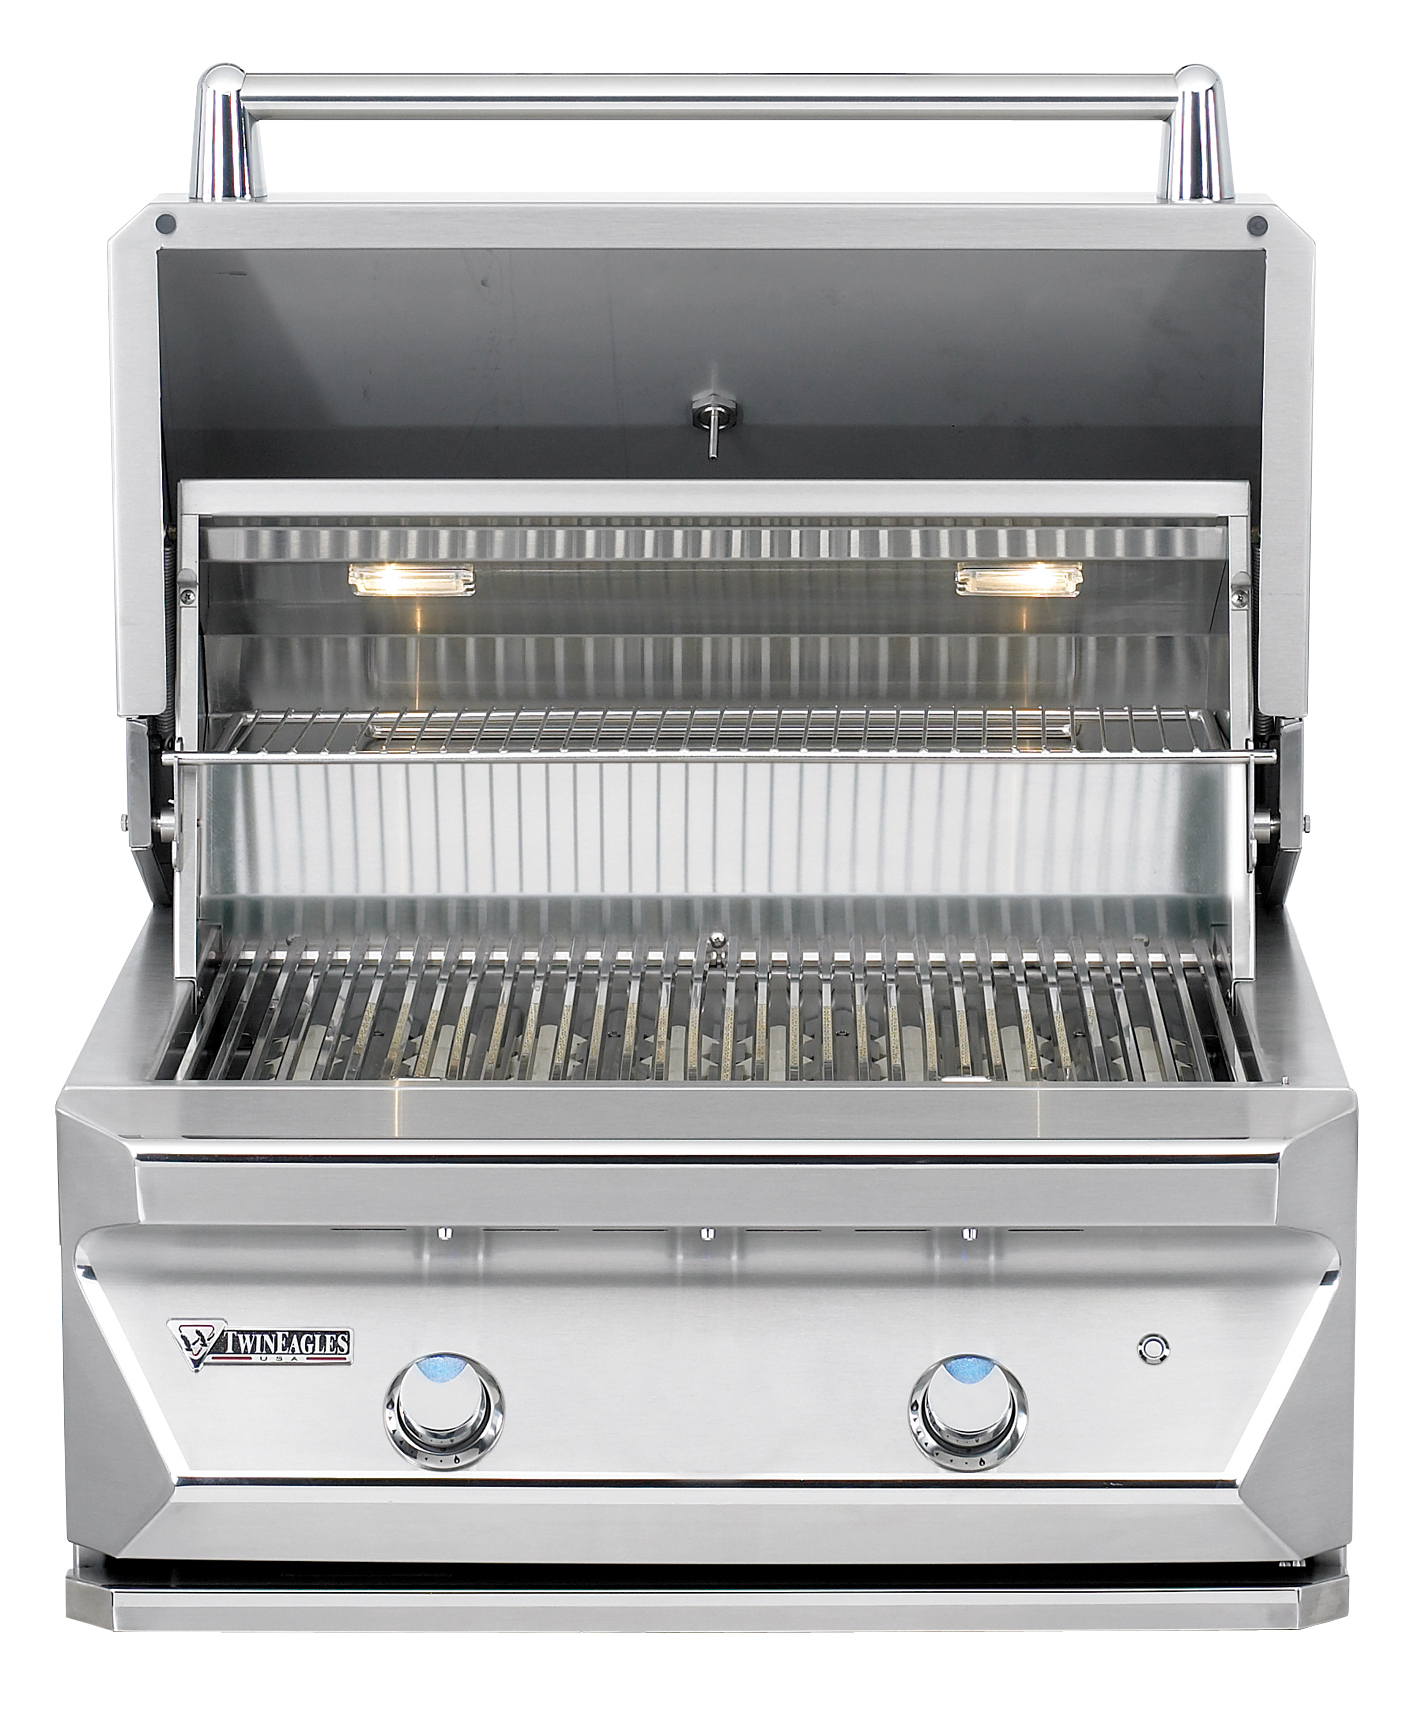 Twin Eagles TEBQ30 Built-in Grill